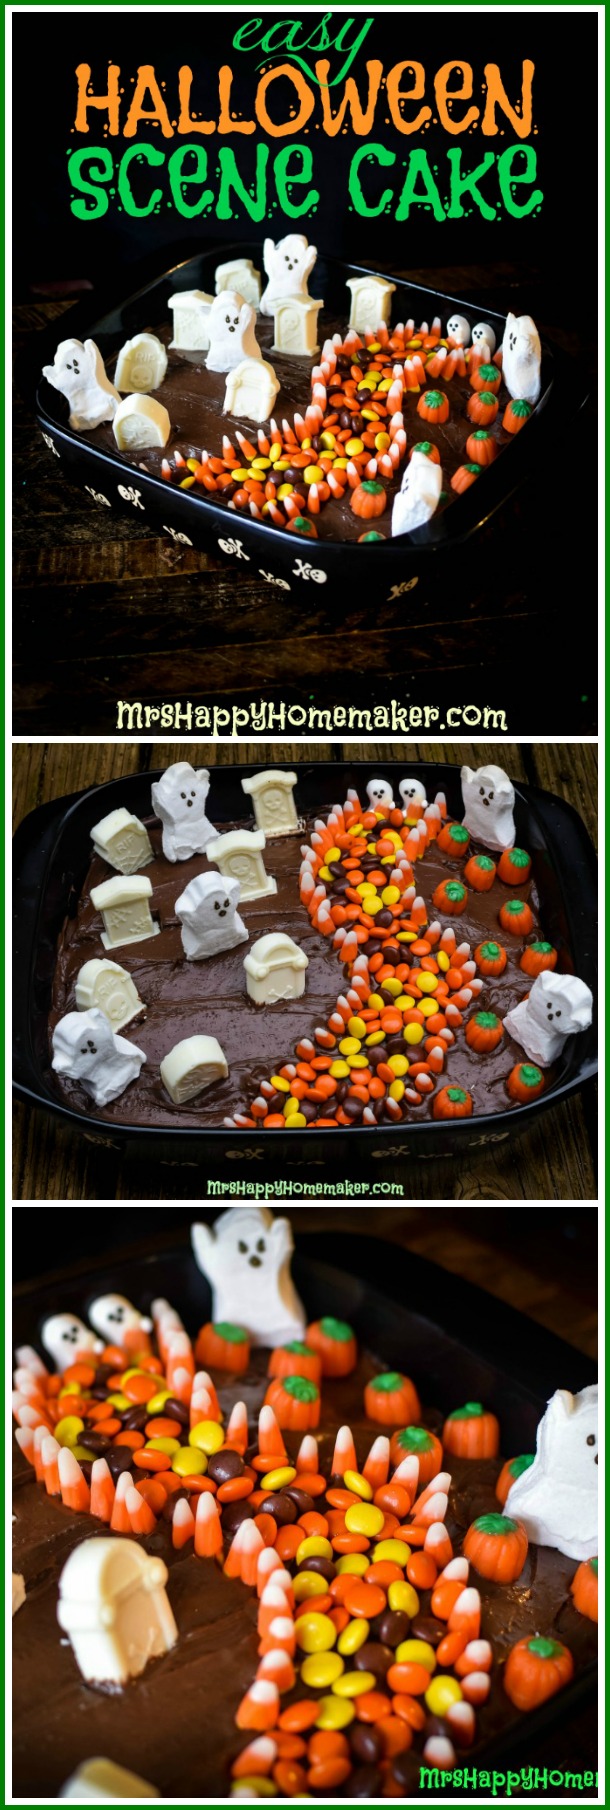 Halloween scene cake with candy ghosts, graves, pumpkins and a sidewalk 